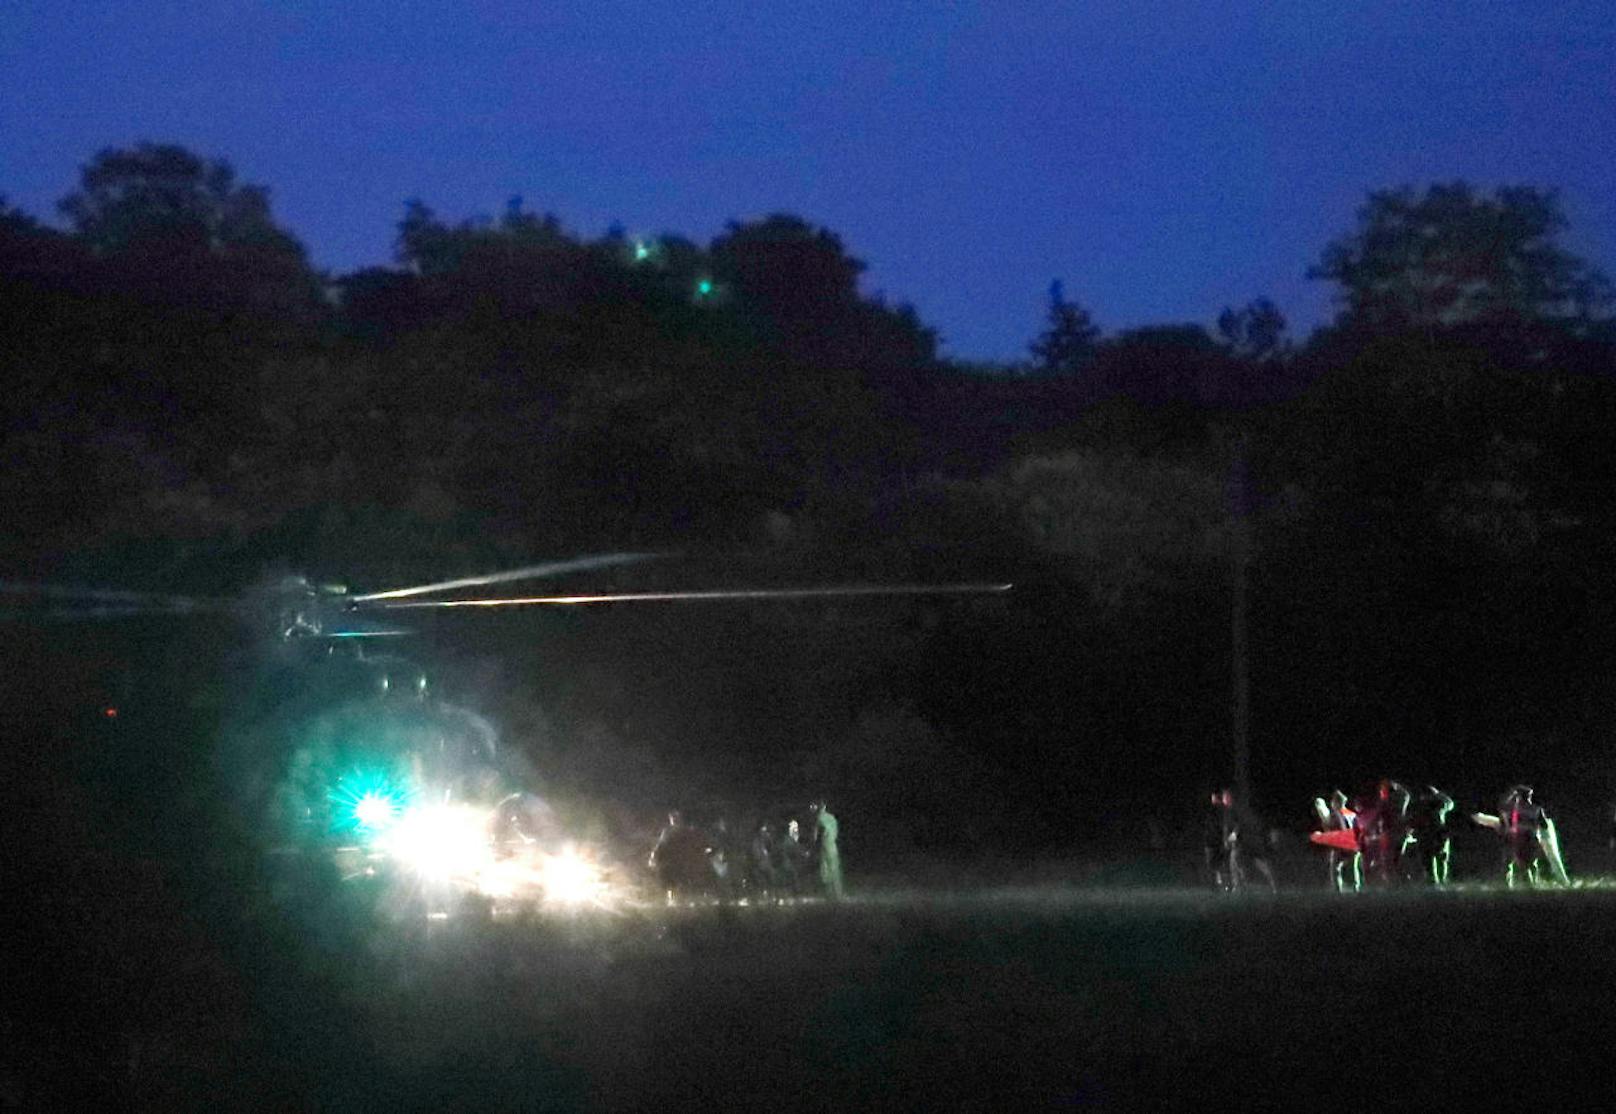 epa06873696 Thai medics and police officers evacuate children after rescued from Tham Luang cave before heading to hospital, at a helicopter pad in Chiang Rai province, Thailand, 08 July 2018. The first six children have been confirmed to rescue on 08 July 2018 after have been trapped in Tham Luang cave since 23 June 2018.  EPA-EFE/RUNGROJ YONGRIT